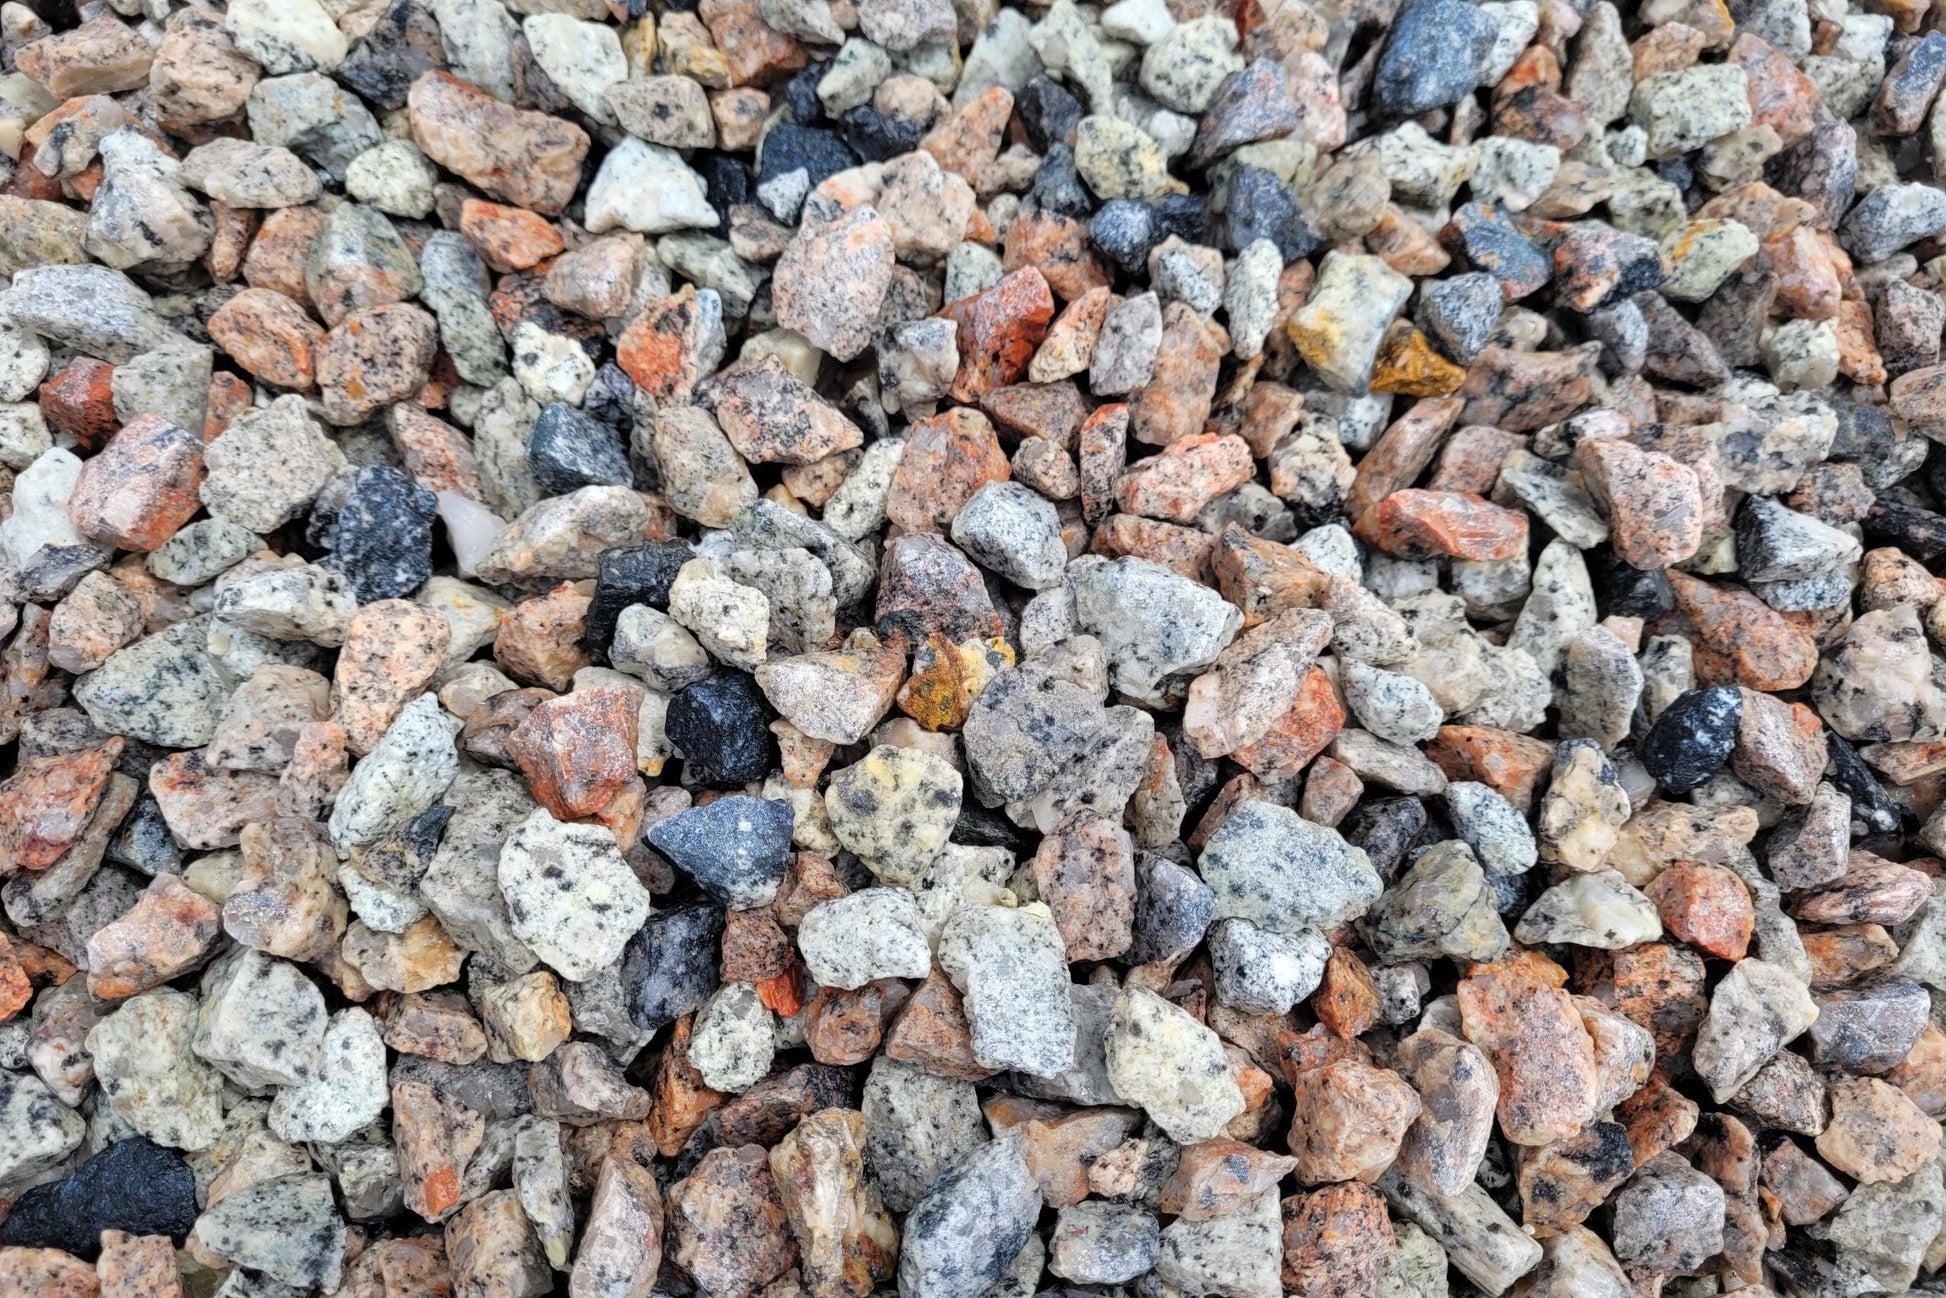 Close-up view of a pile of small, irregularly-shaped landscaping gravel stones in various shades of gray, white, orange, and black. The stones have a rough texture and are unevenly distributed — perfect for driveways or garden paths featuring 14-20mm Silver Grey Granite Chippings by Brisks.